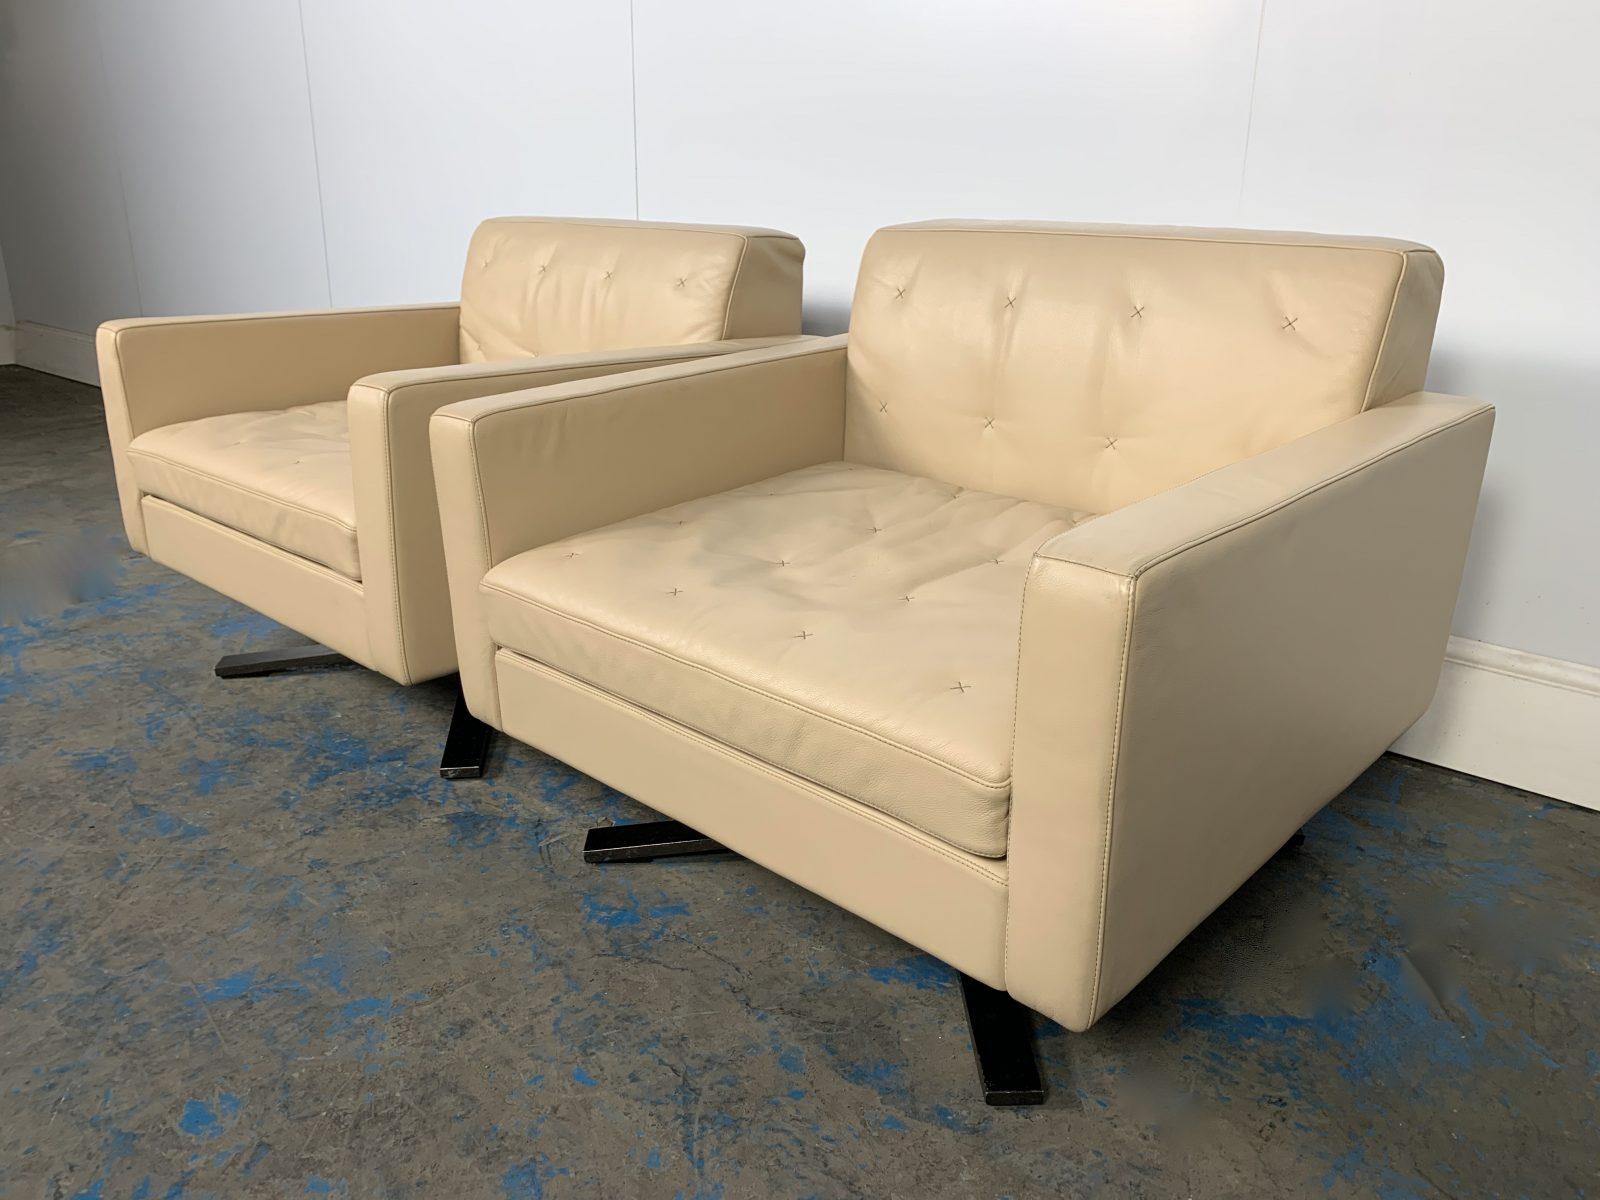 On offer on this occasion is an ultra-rare identical pair of “Kennedee” armchairs from the world renown Italian furniture house of Poltrona Frau which, somewhat remarkably, was a special-order commission made for Ferrari and, uniquely, possesses